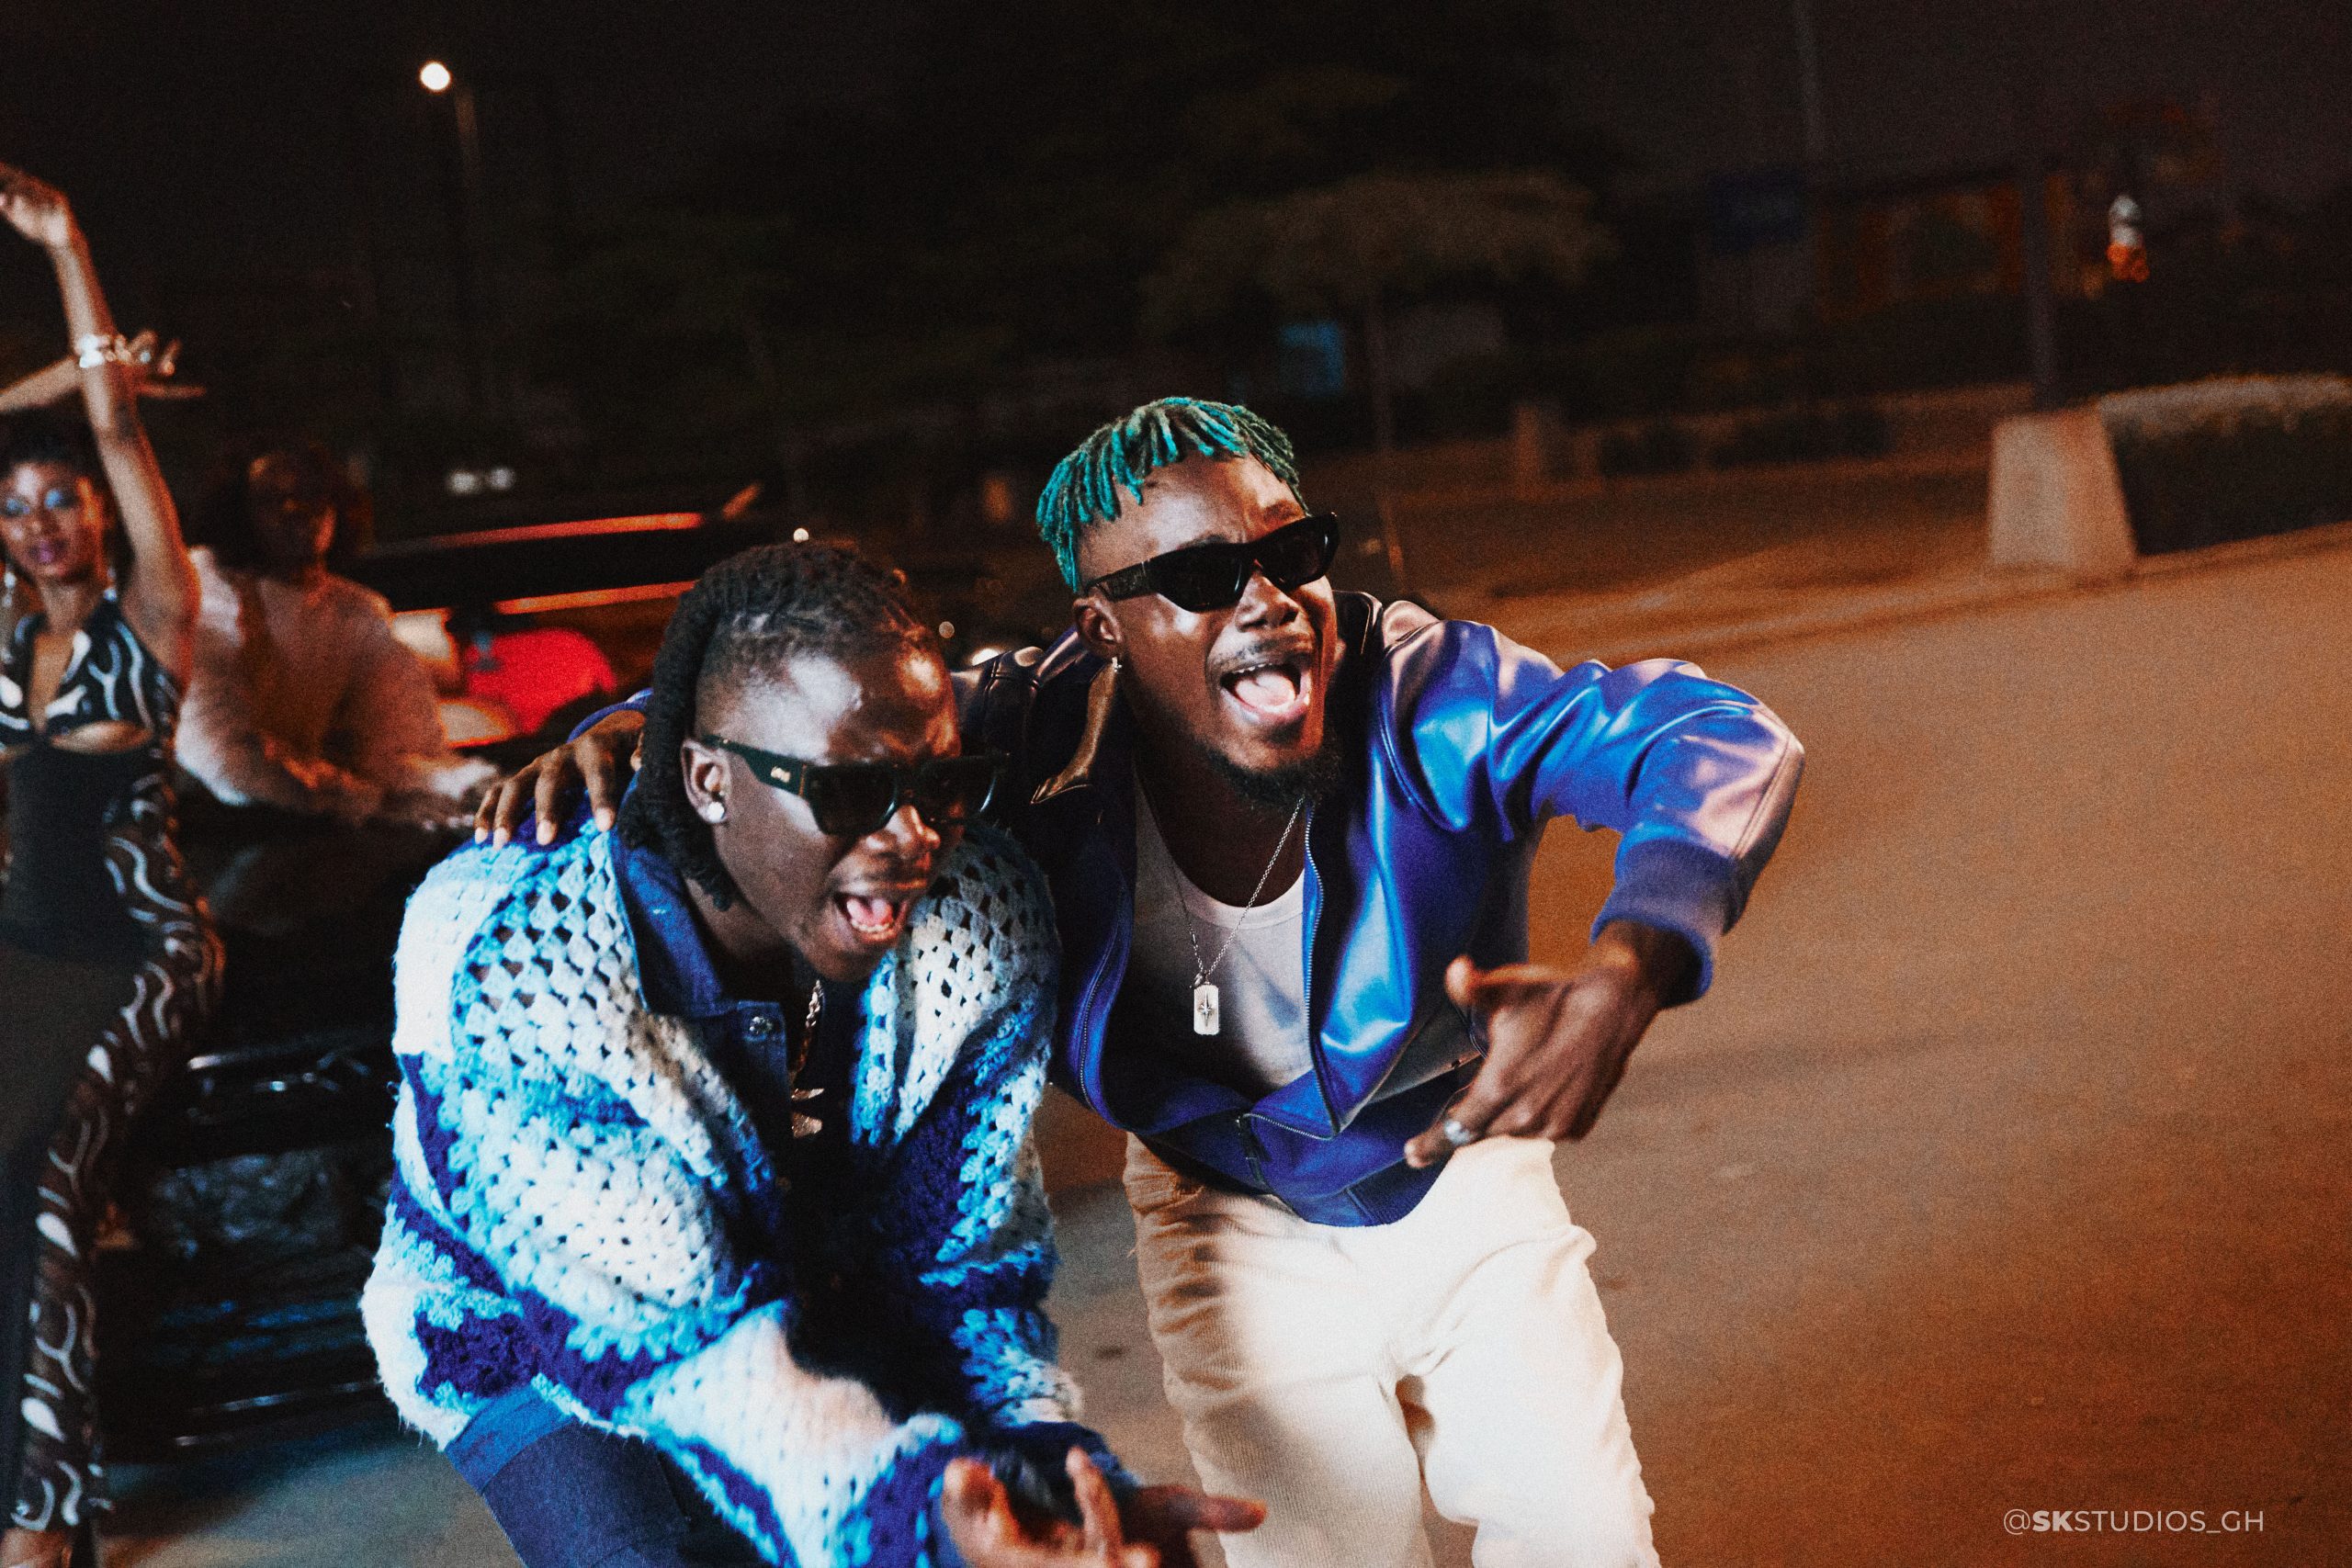 Camidoh Drops official Video For “Brown Skin Girl” Featuring Stonebwoy.